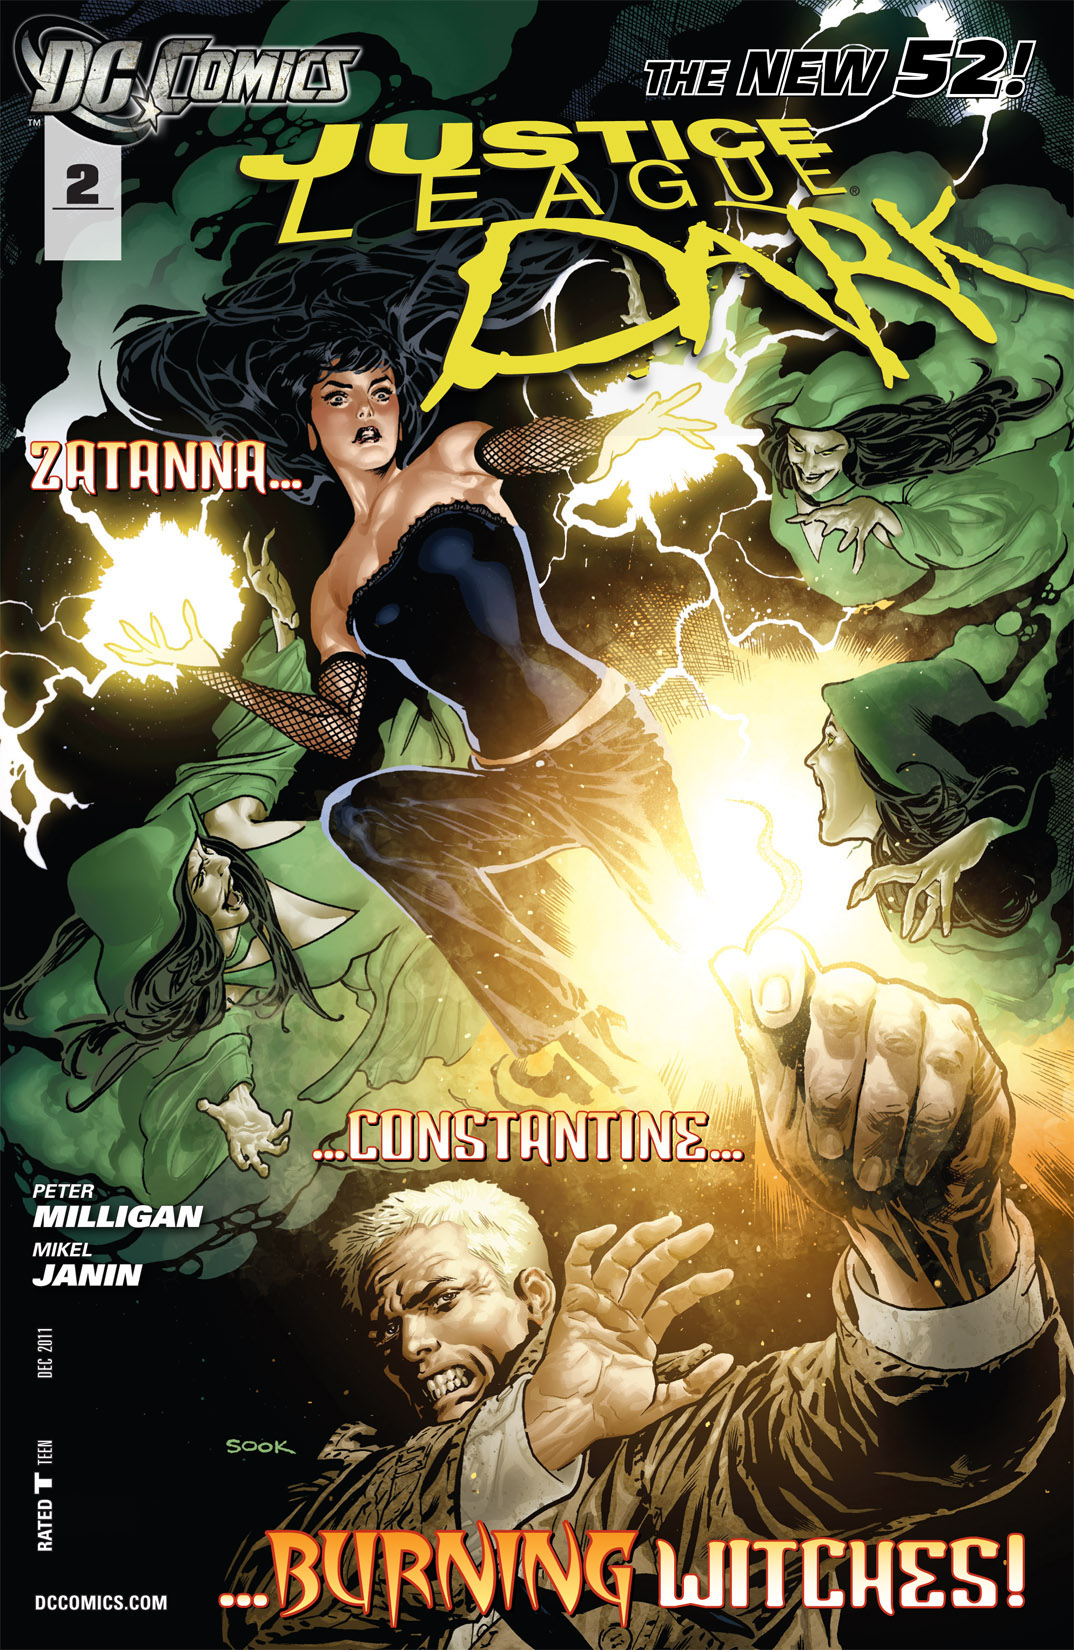 Justice League Dark (2011-) #2 preview images